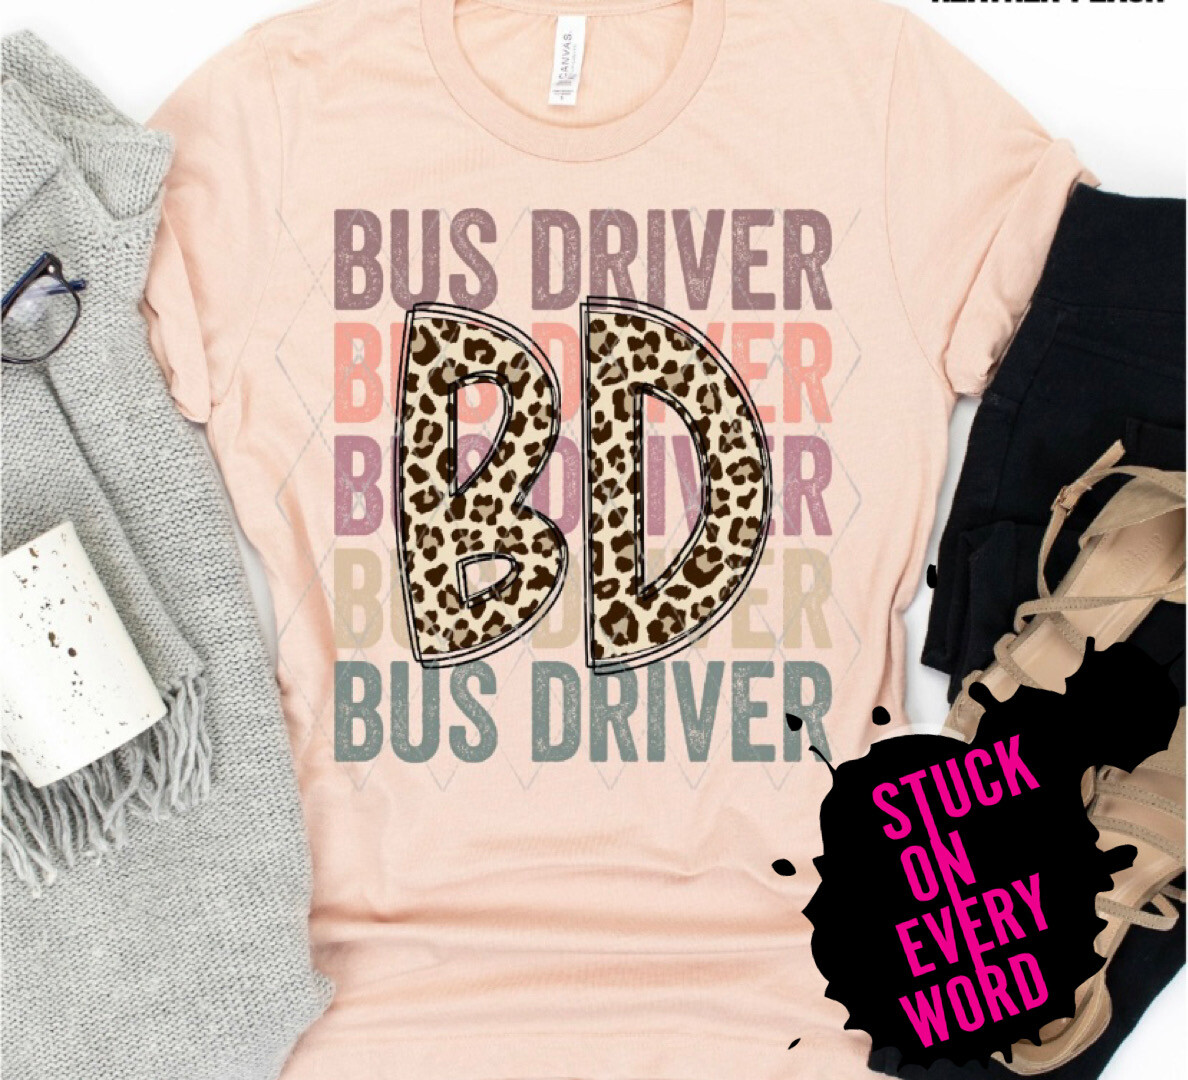 Bus Driver Stacked